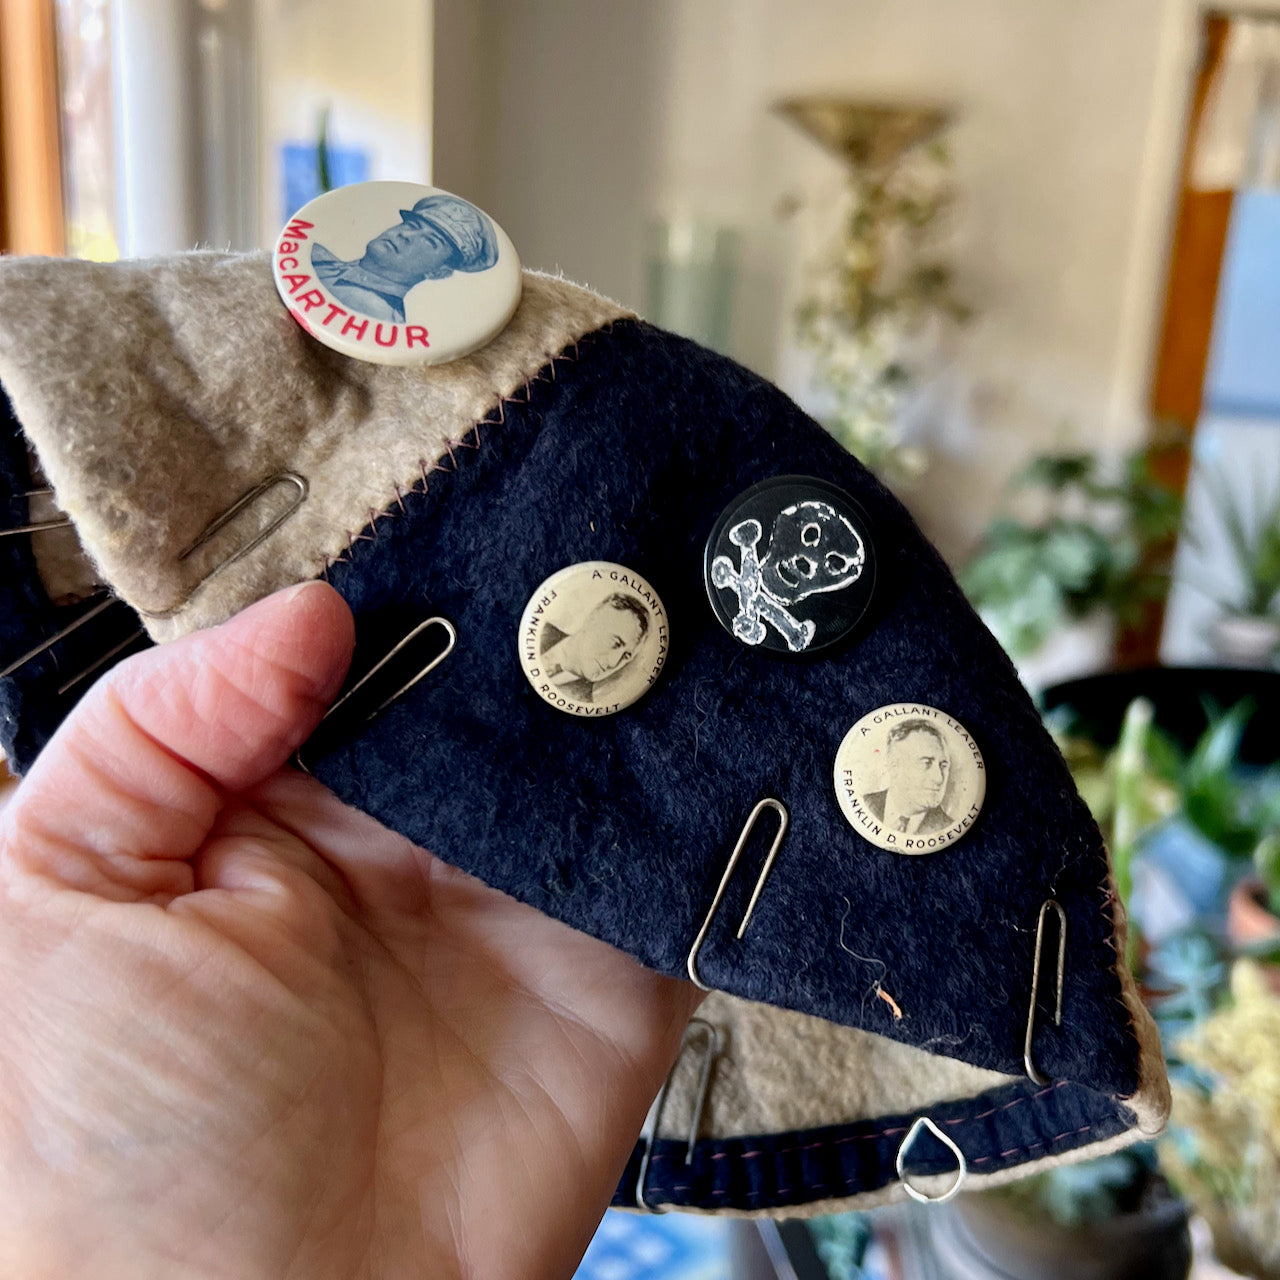 Advertising Felt Beanie with Vintage Charms (c.1930s-1940s)